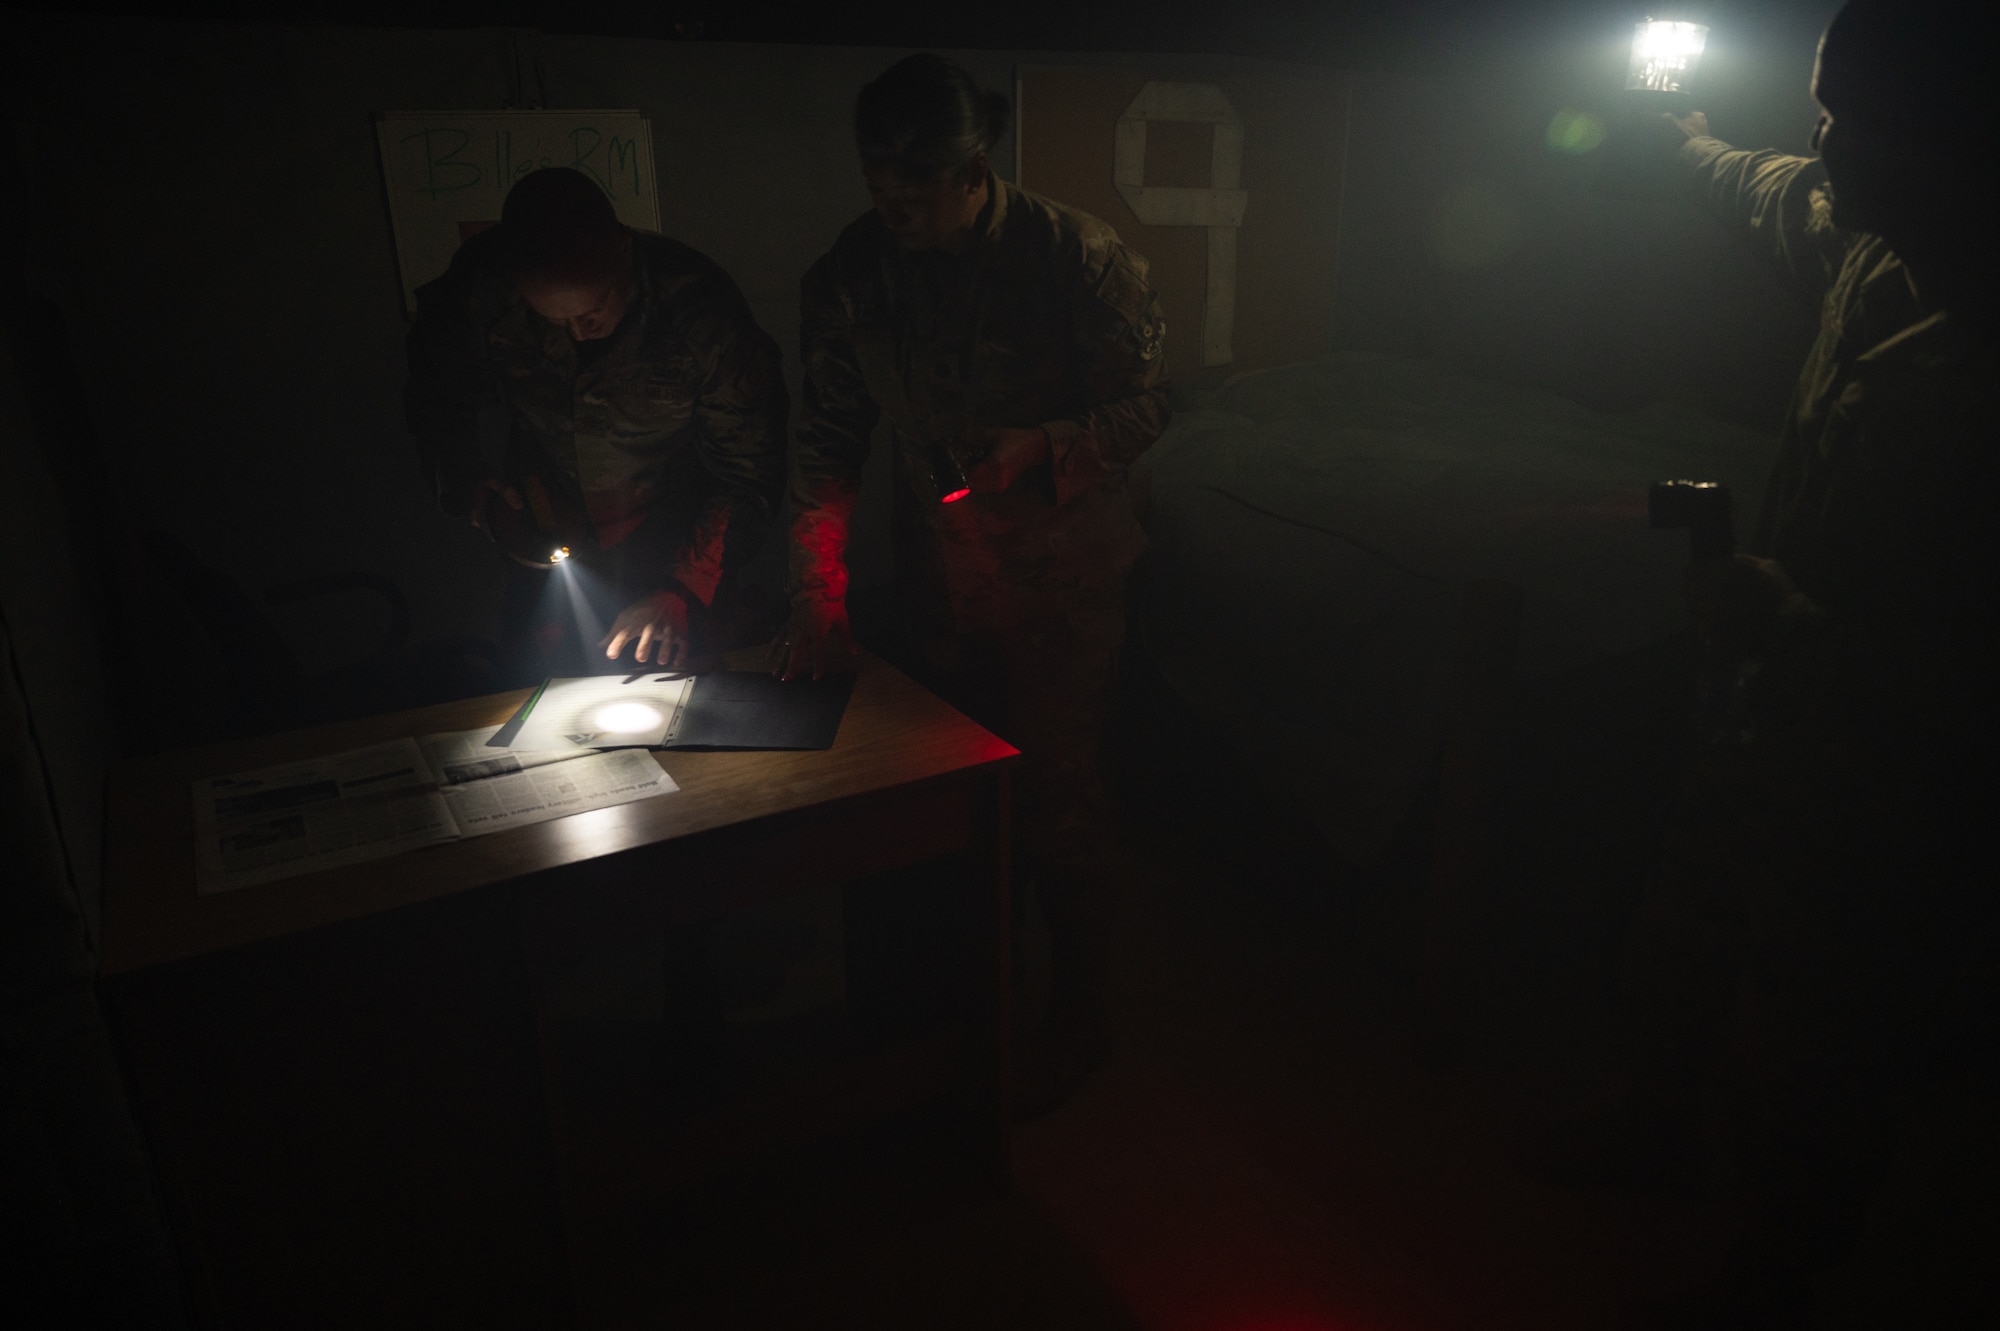 U.S. Air Force Airmen participate in a fire escape room exercise for fire safety awareness Oct. 12, 2022 at Al Udeid Air Base, Qatar. The Airmen worked together to find clues, unlock padlocks and perform a rescue as part of an exercise to impress upon people the importance and challenge of fire safety awareness.